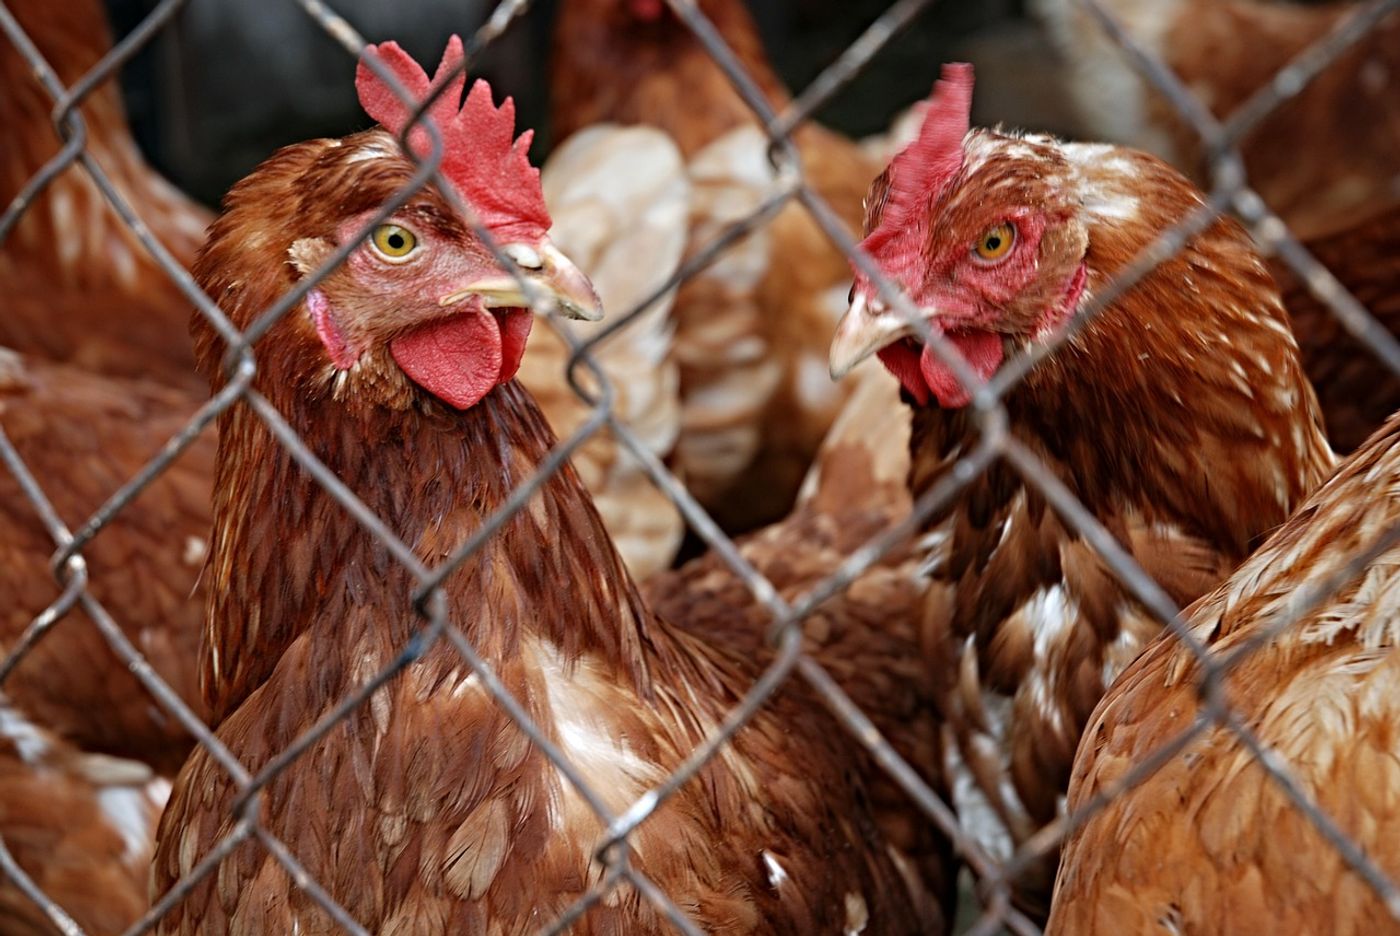 Bird flu problems forced the English government to place restrictions on poultry to prevent the spread of the disease, but as risk declines, the government is overturning those restrictions.